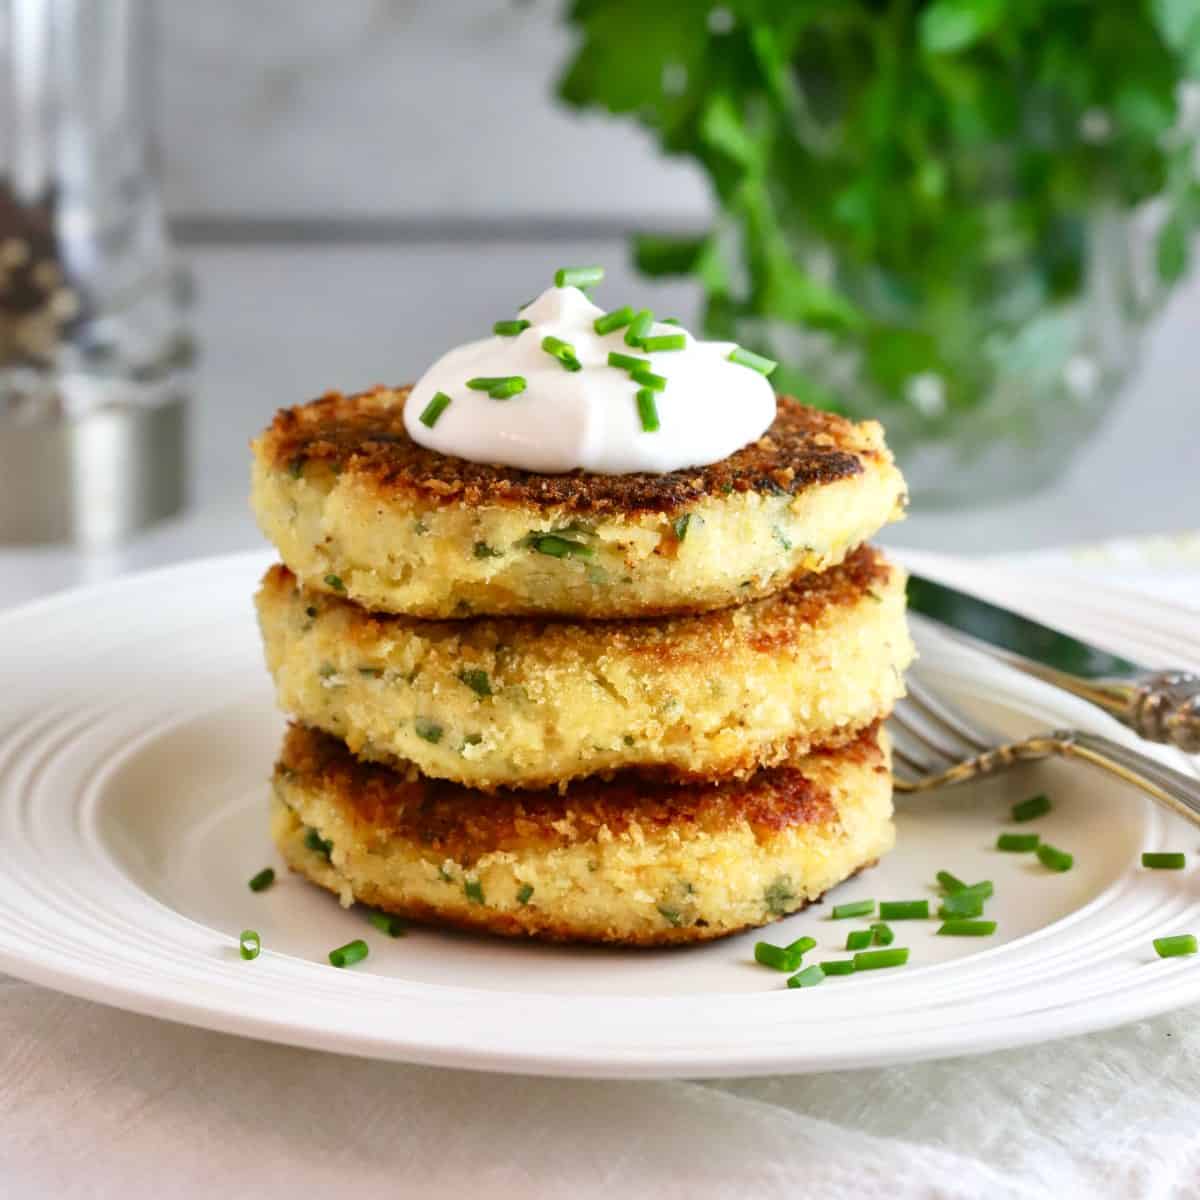 Three potato fritters topped with sour cream and chives on a plate.